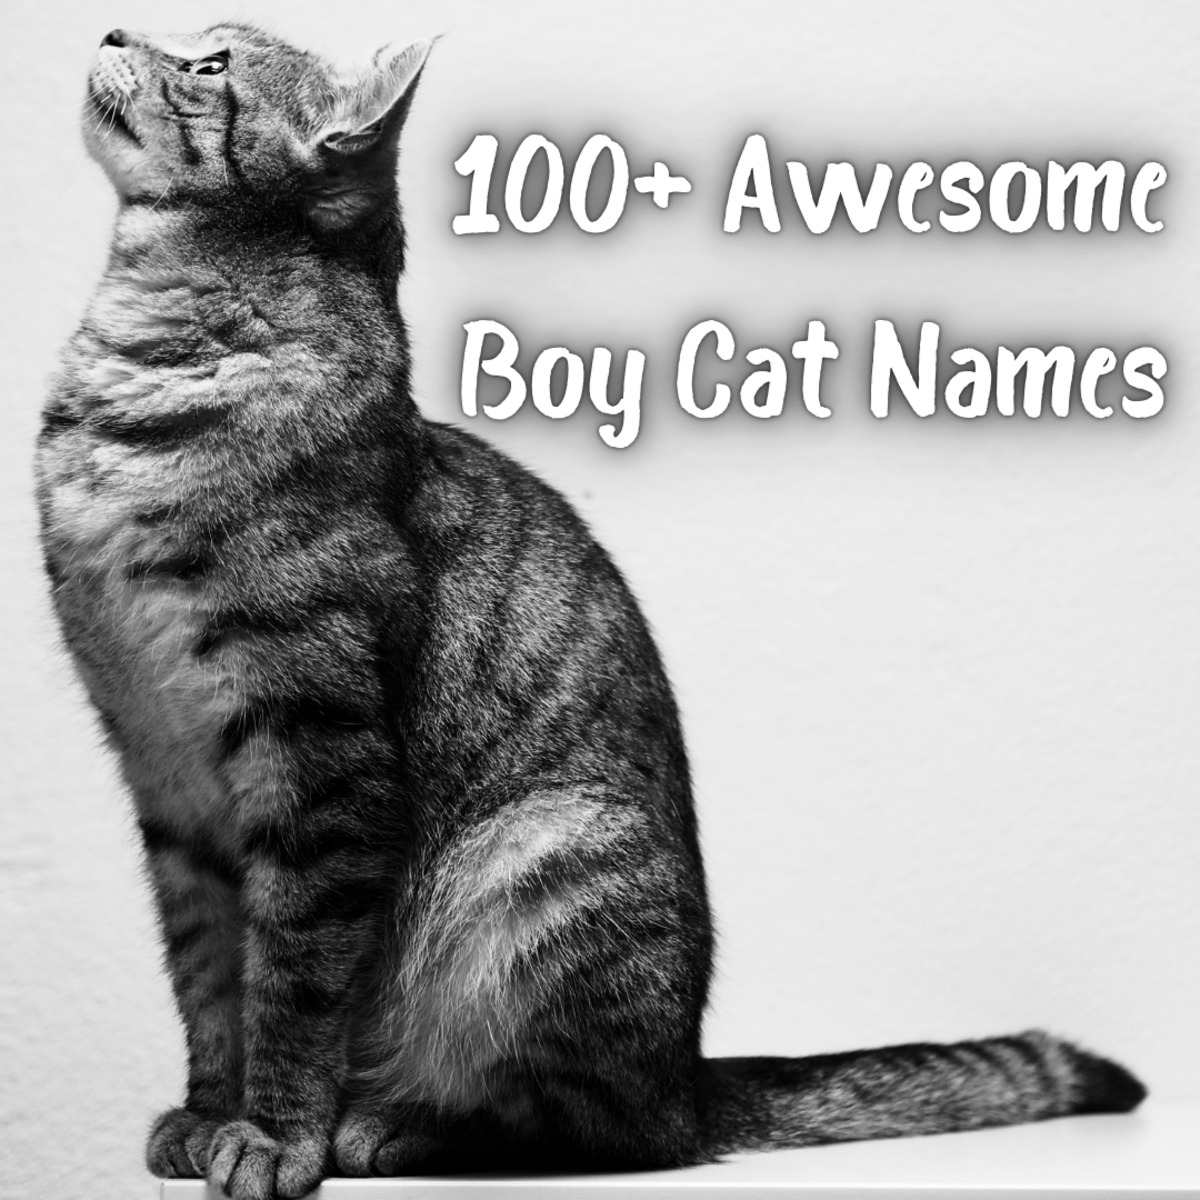 100+ Awesome Boy Cat Names